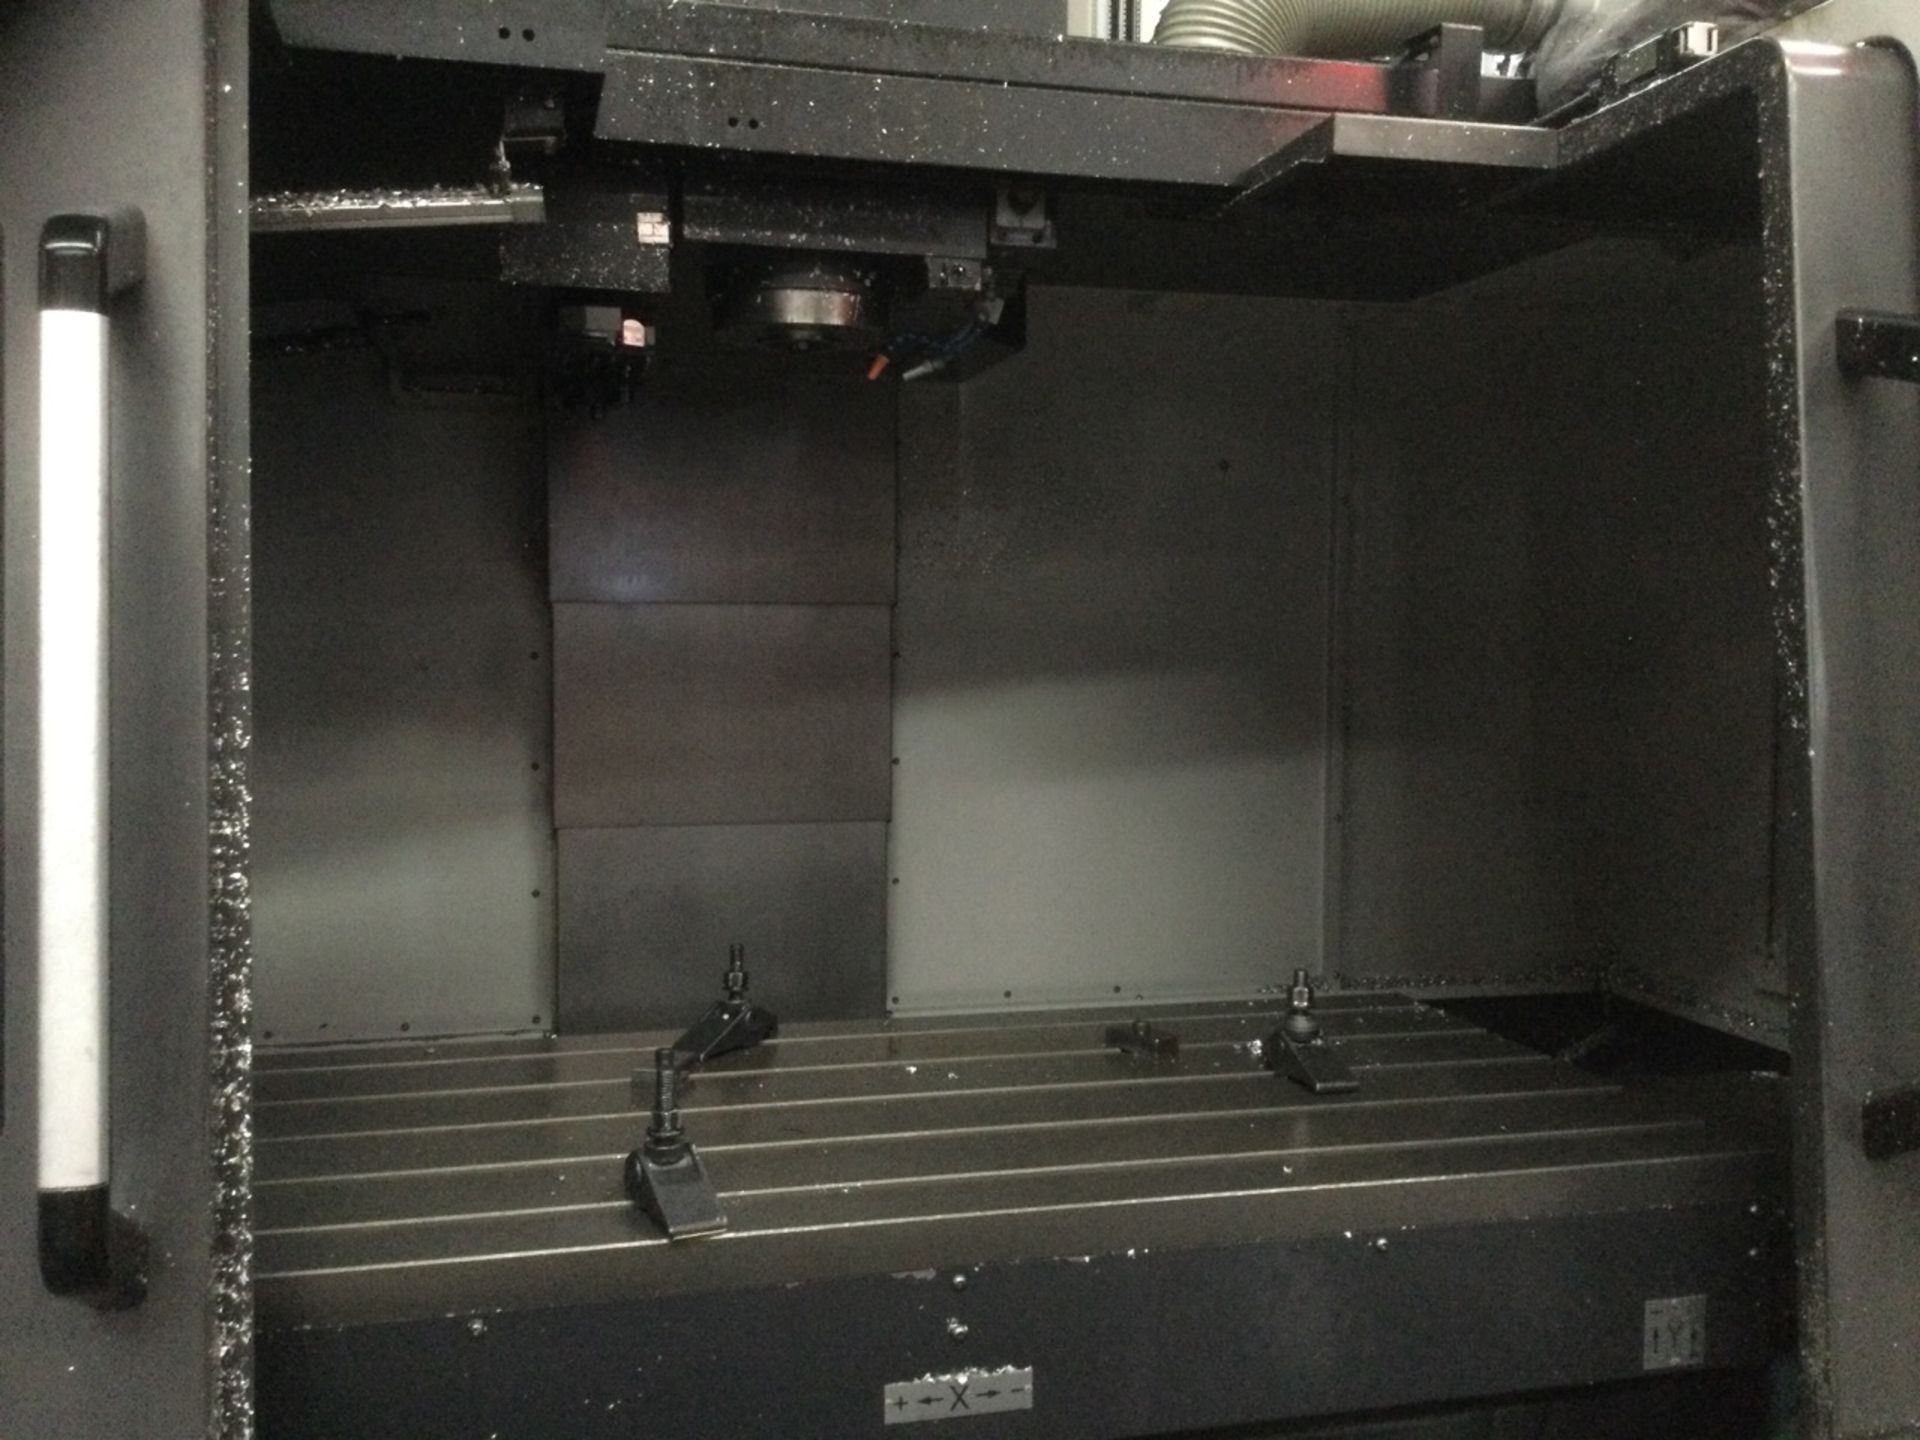 Doosan DNM6700 3-Axis Vertical Machining Centre, Ad40 Spindle Taper, Fanuc I-Series Control - Image 2 of 4